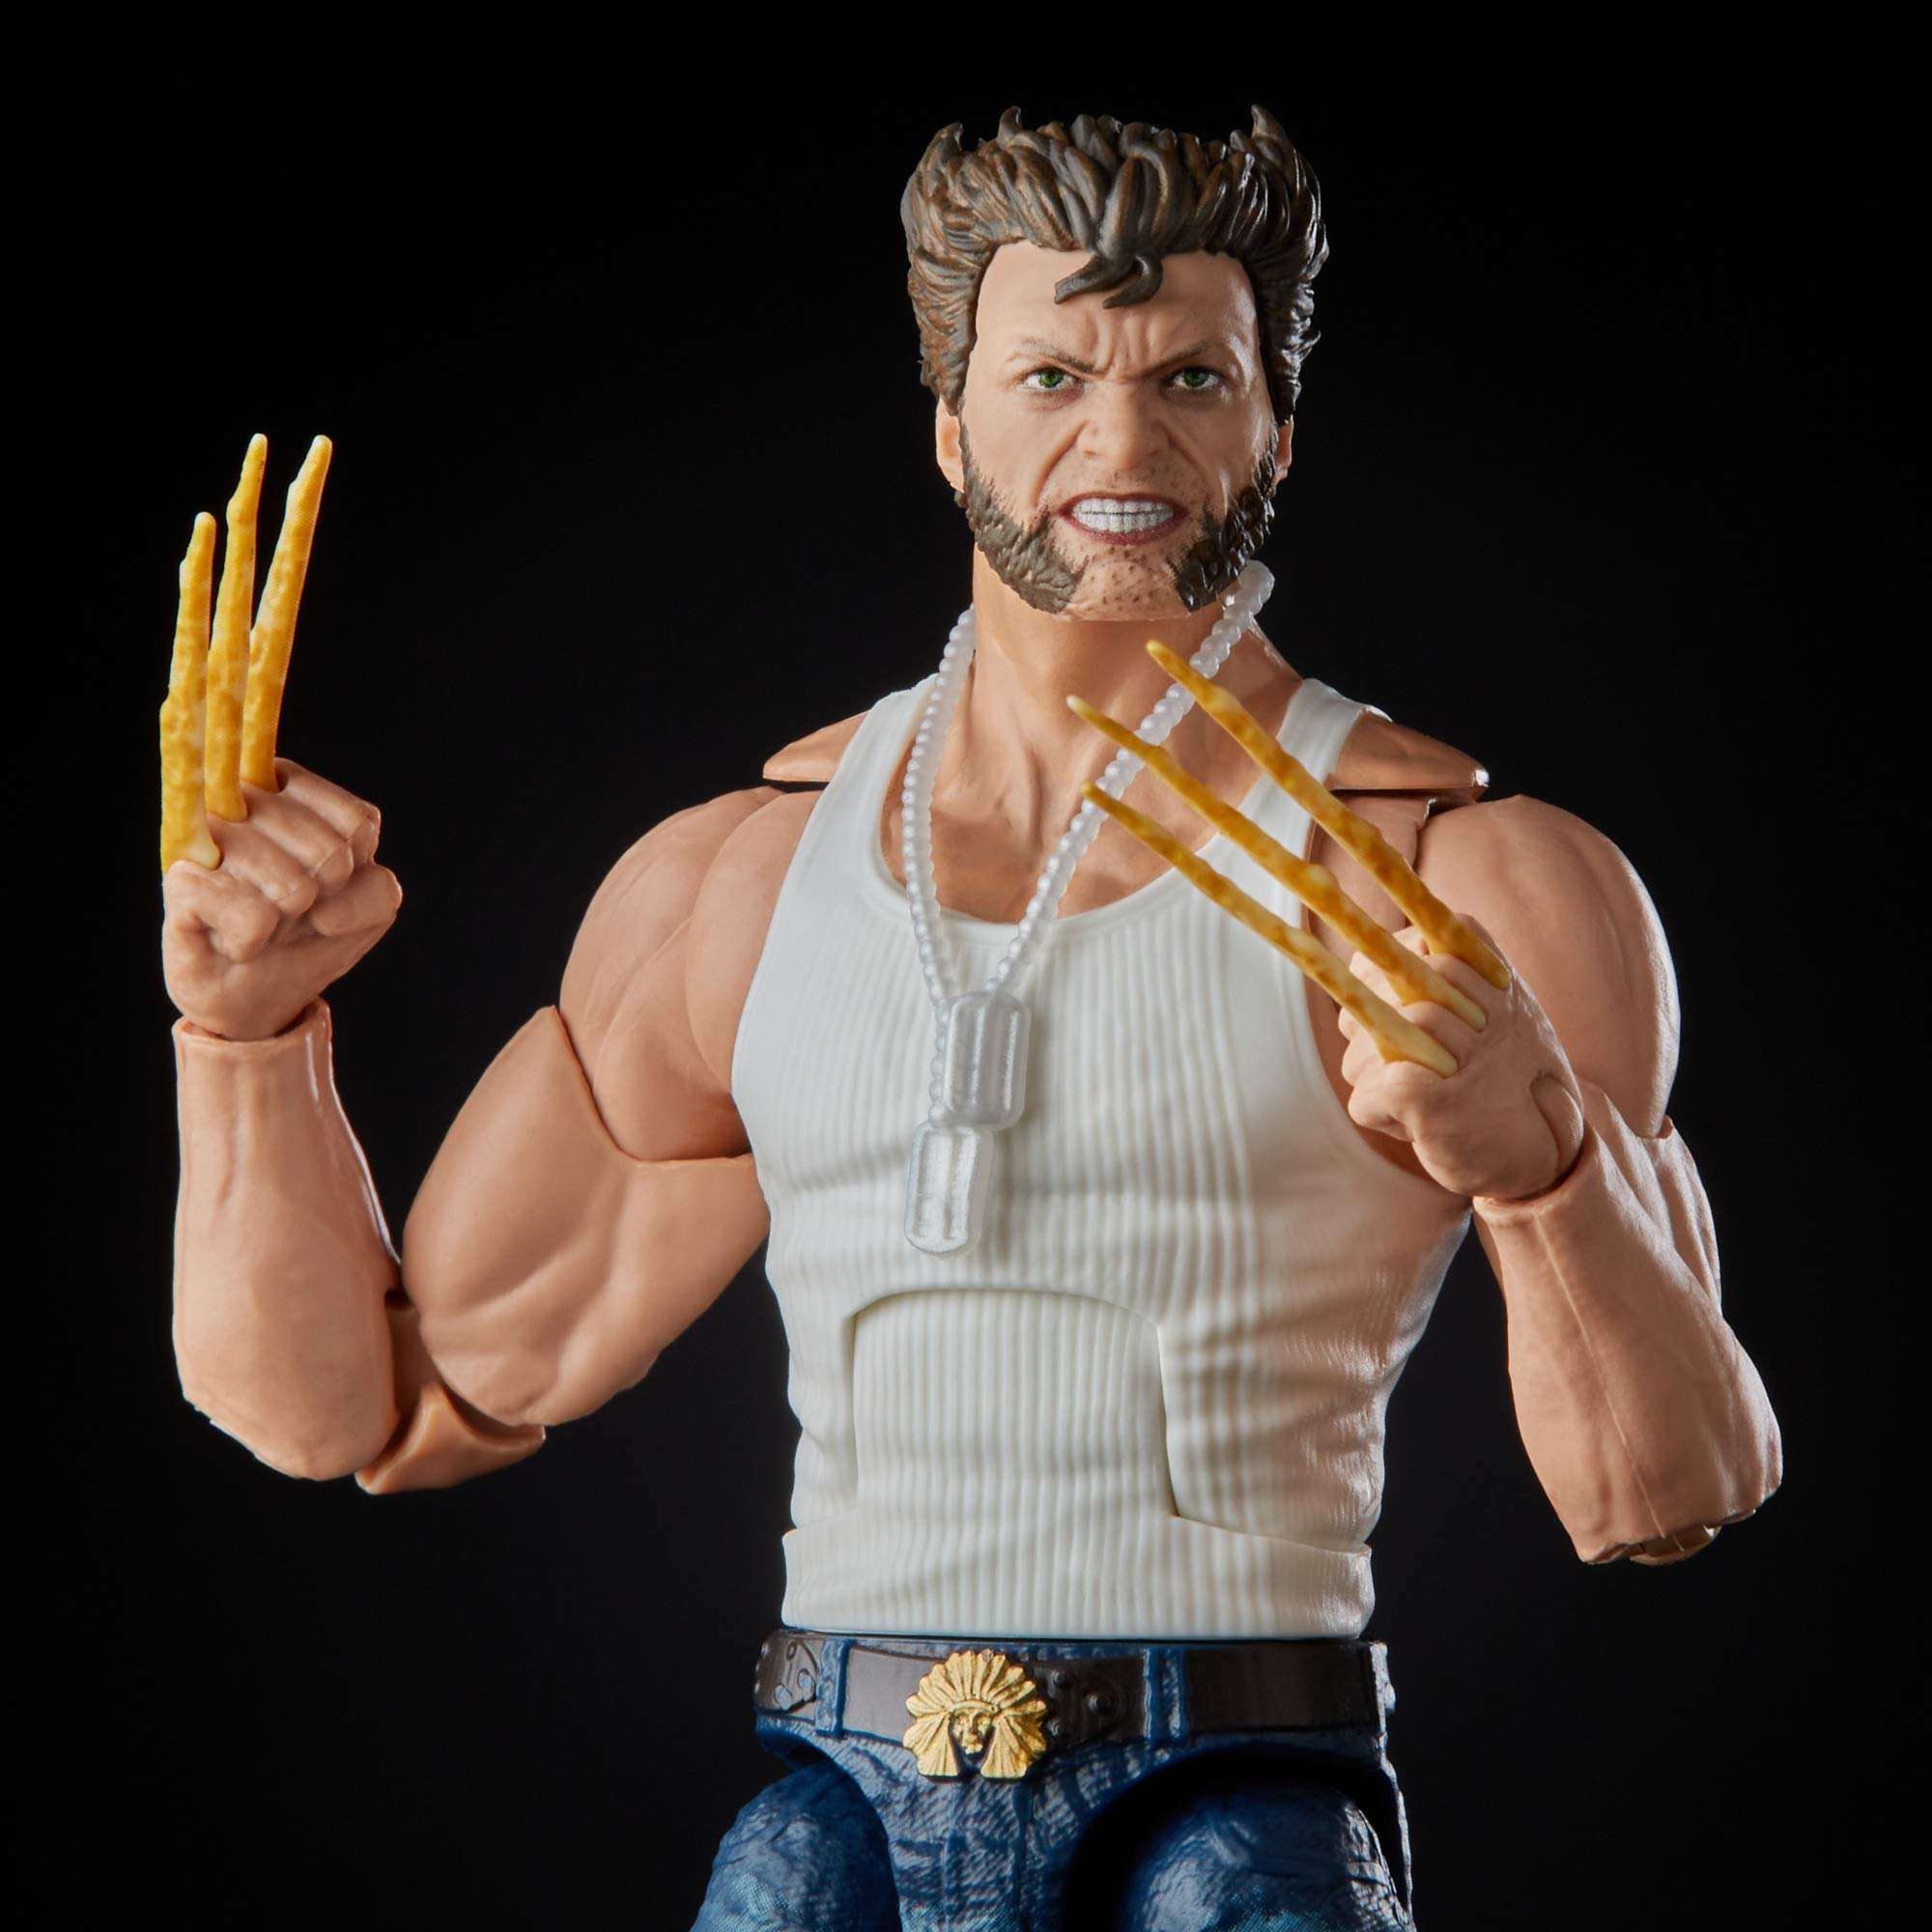 Marvel Hasbro Legends Series Wolverine 6-inch Collectible Action Figure Toy, Ages 14 and Up (Amazon Exclusive)